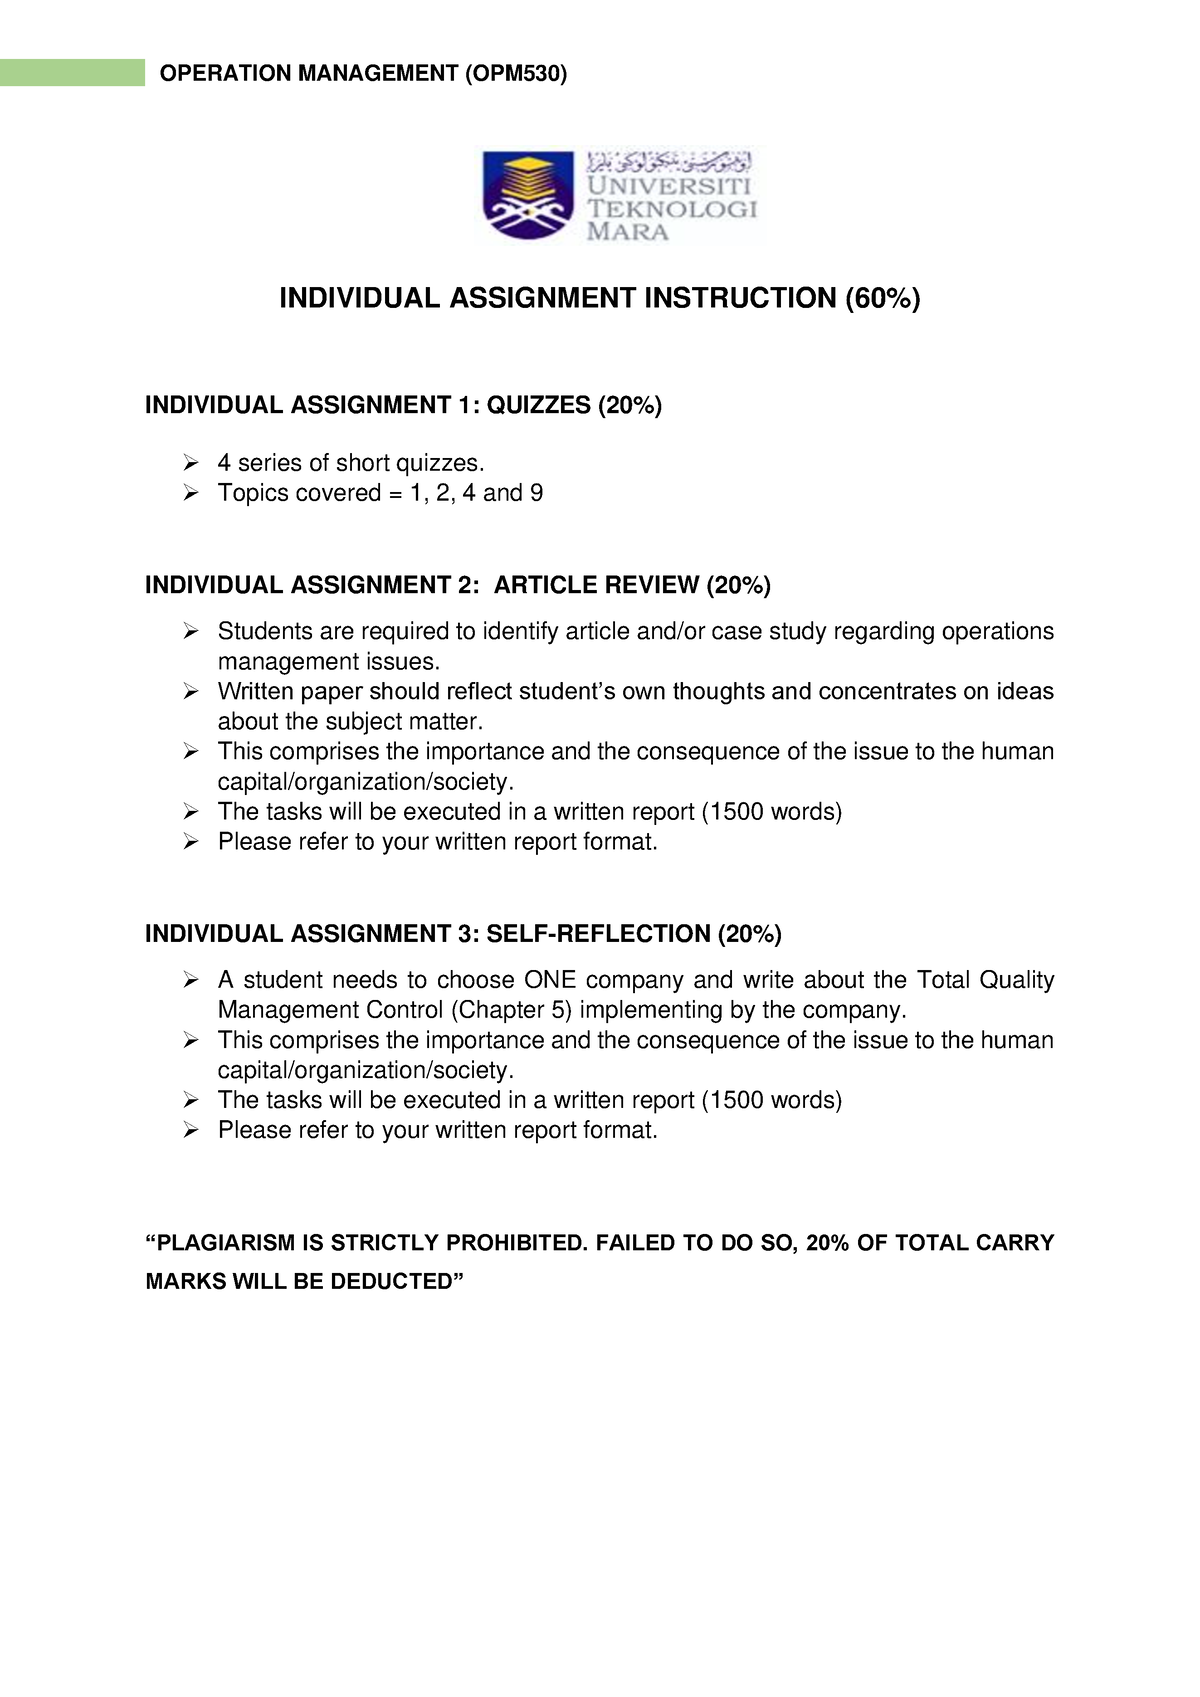 opm530 individual assignment infographic